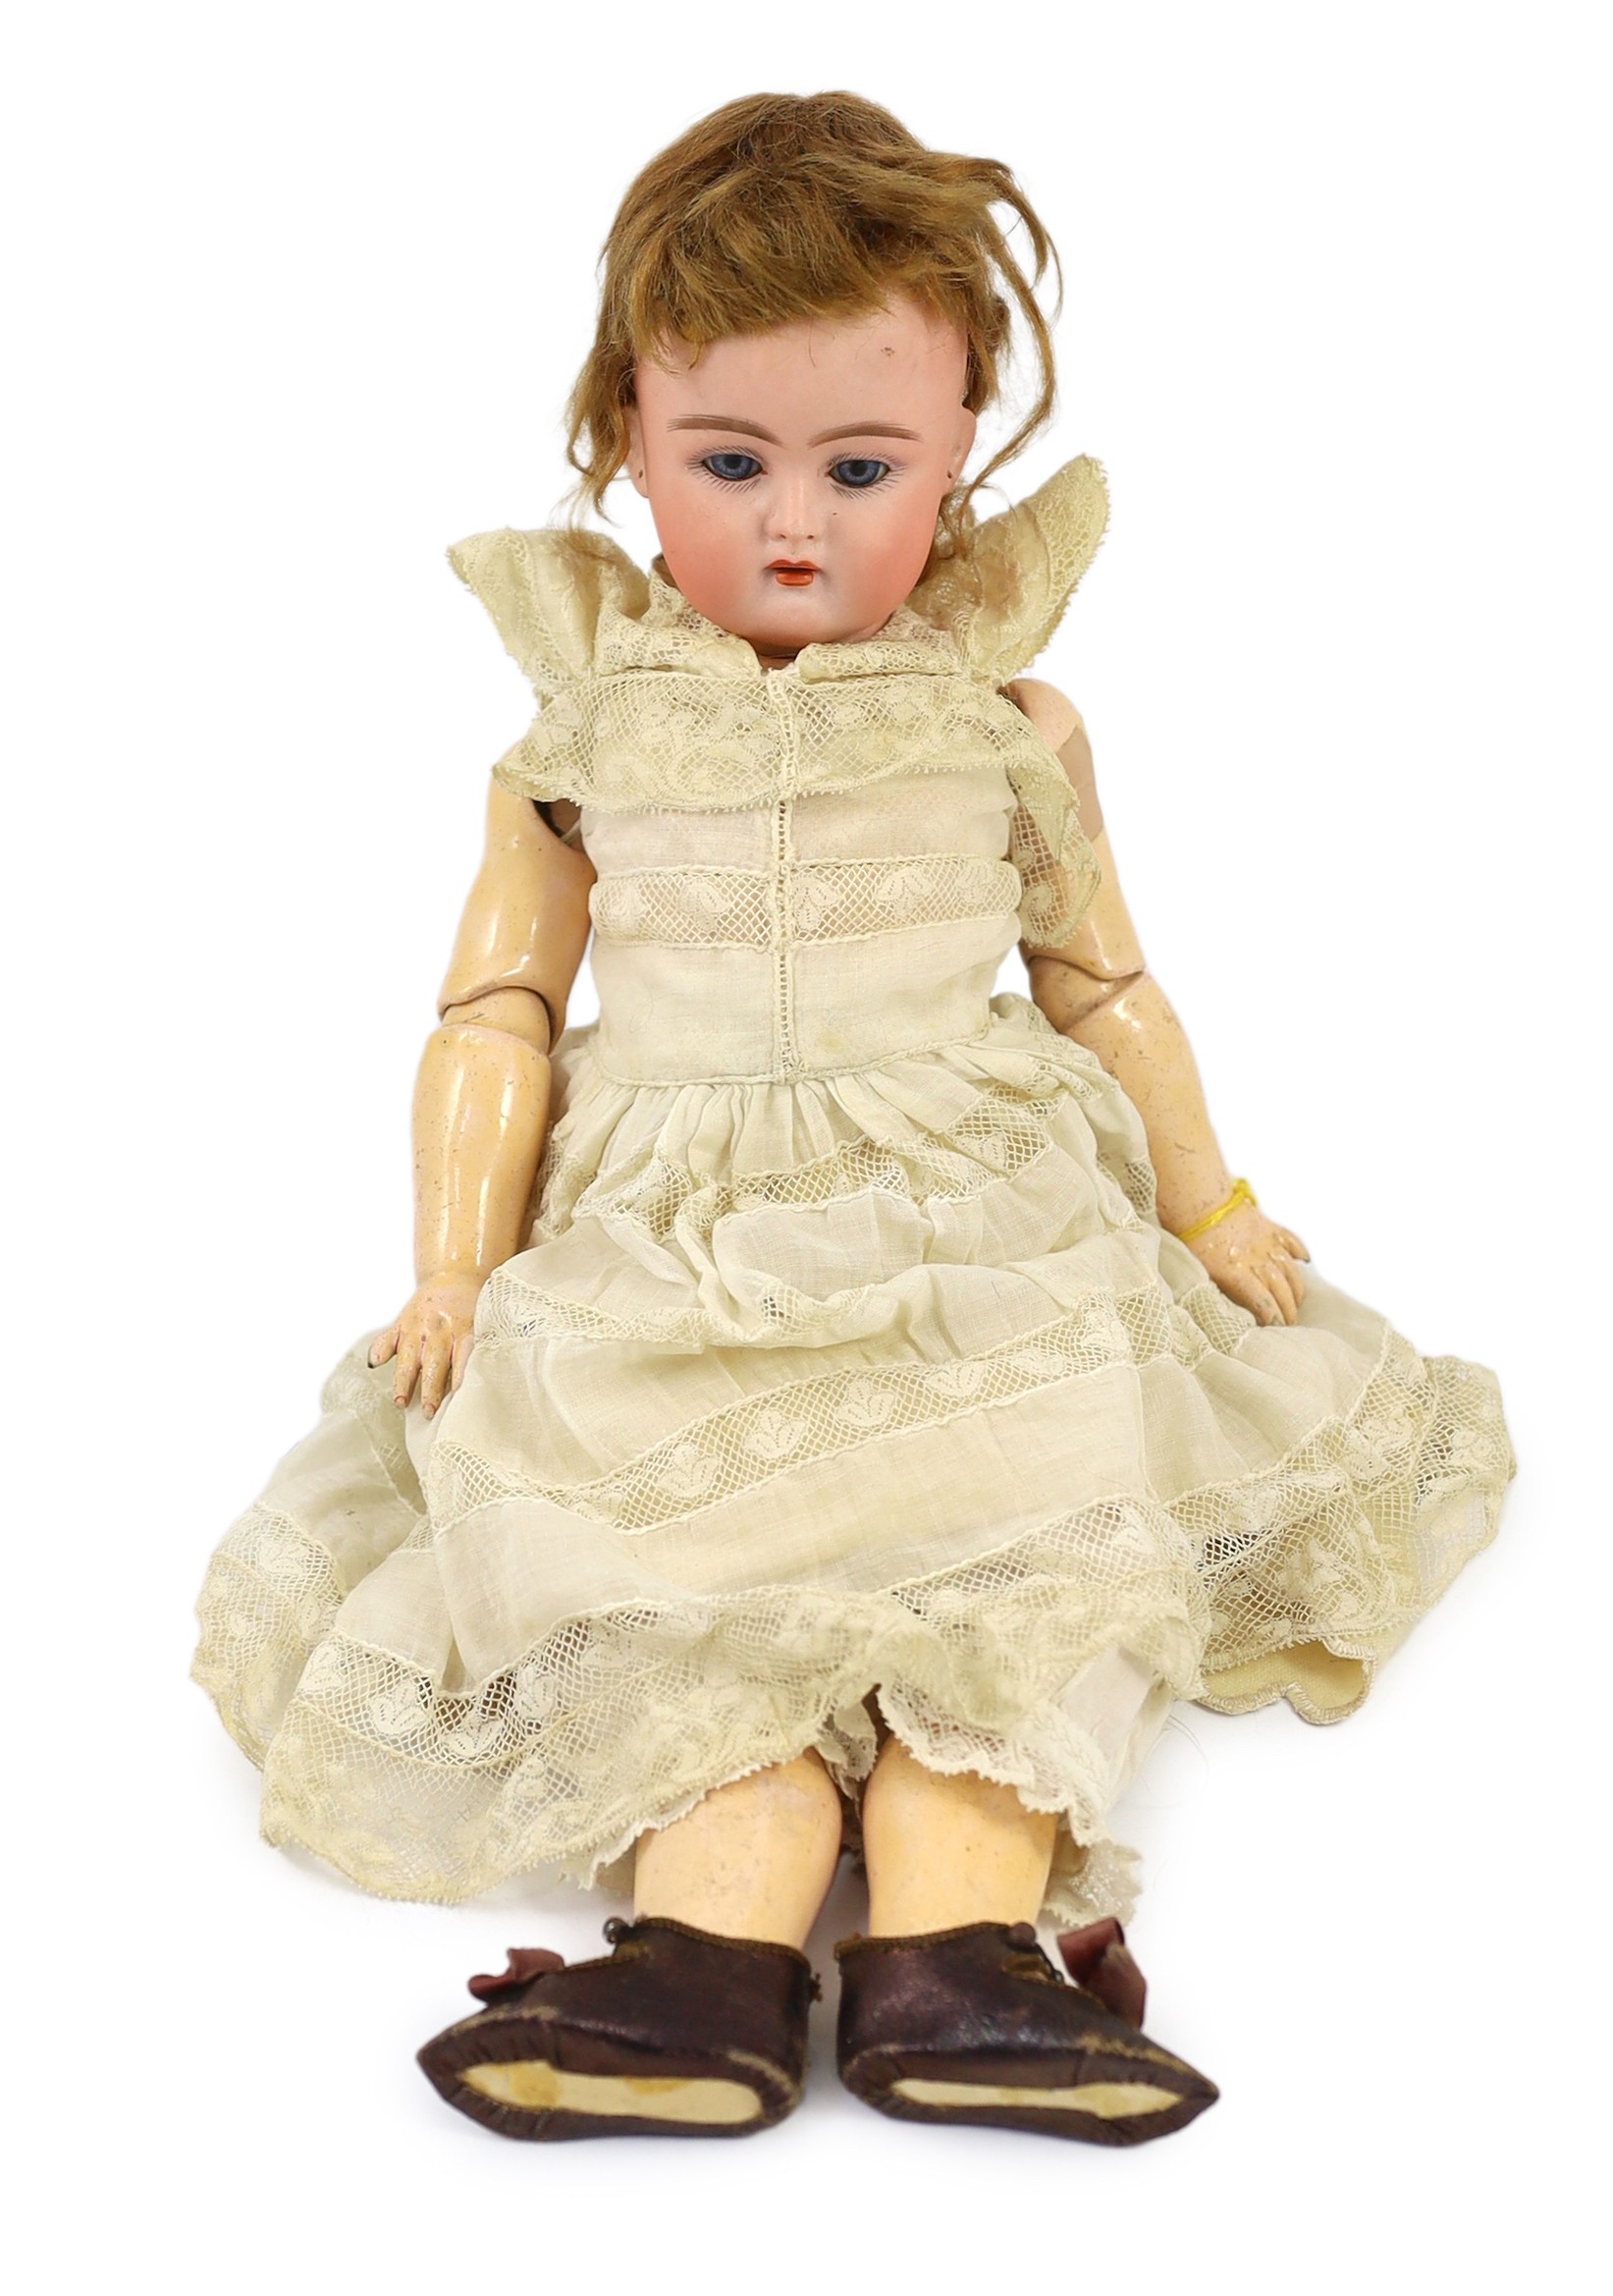 A bisque headed doll, probably by Kammer & Reinhardt, German, circa 1890, 16in.                                                                                                                                             